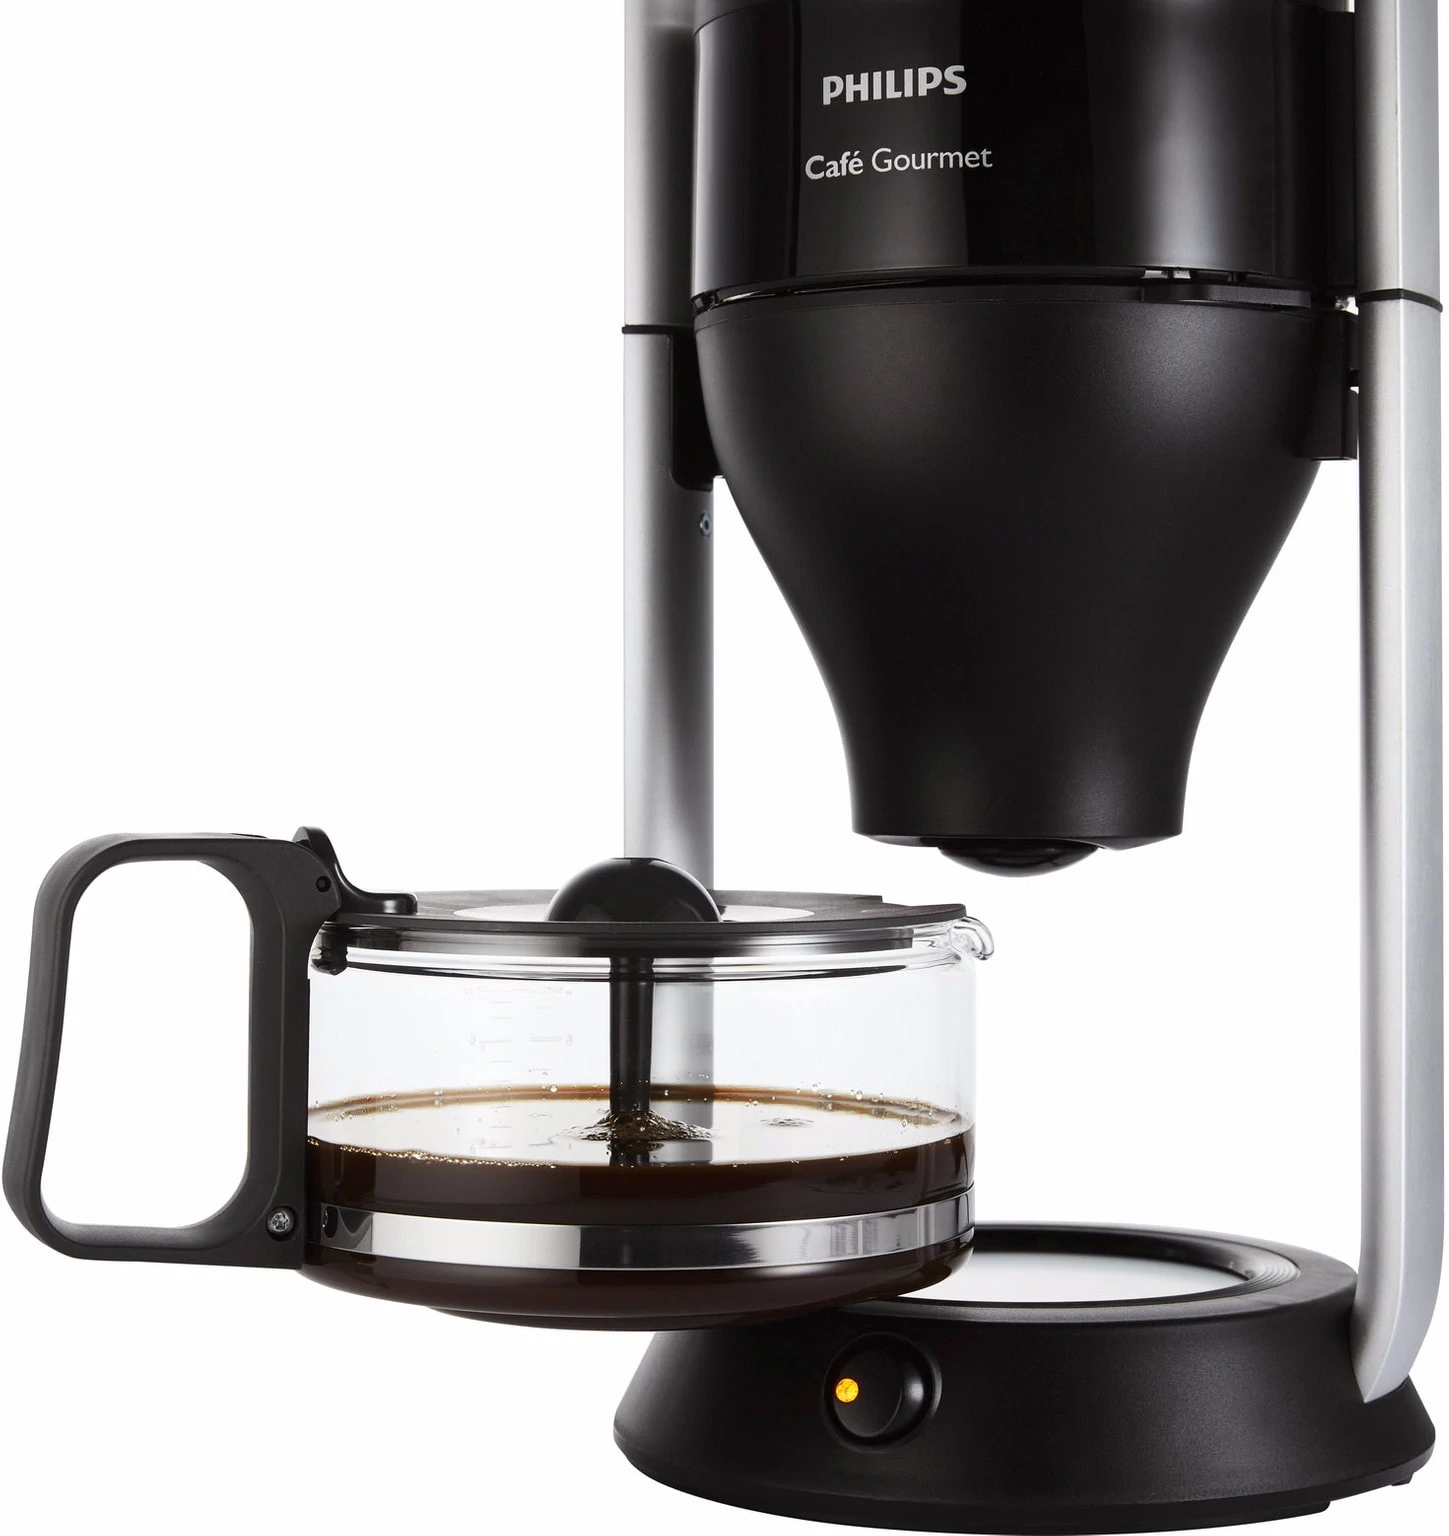 Philips Cafe Gourmet Hd5408:20 Close Up